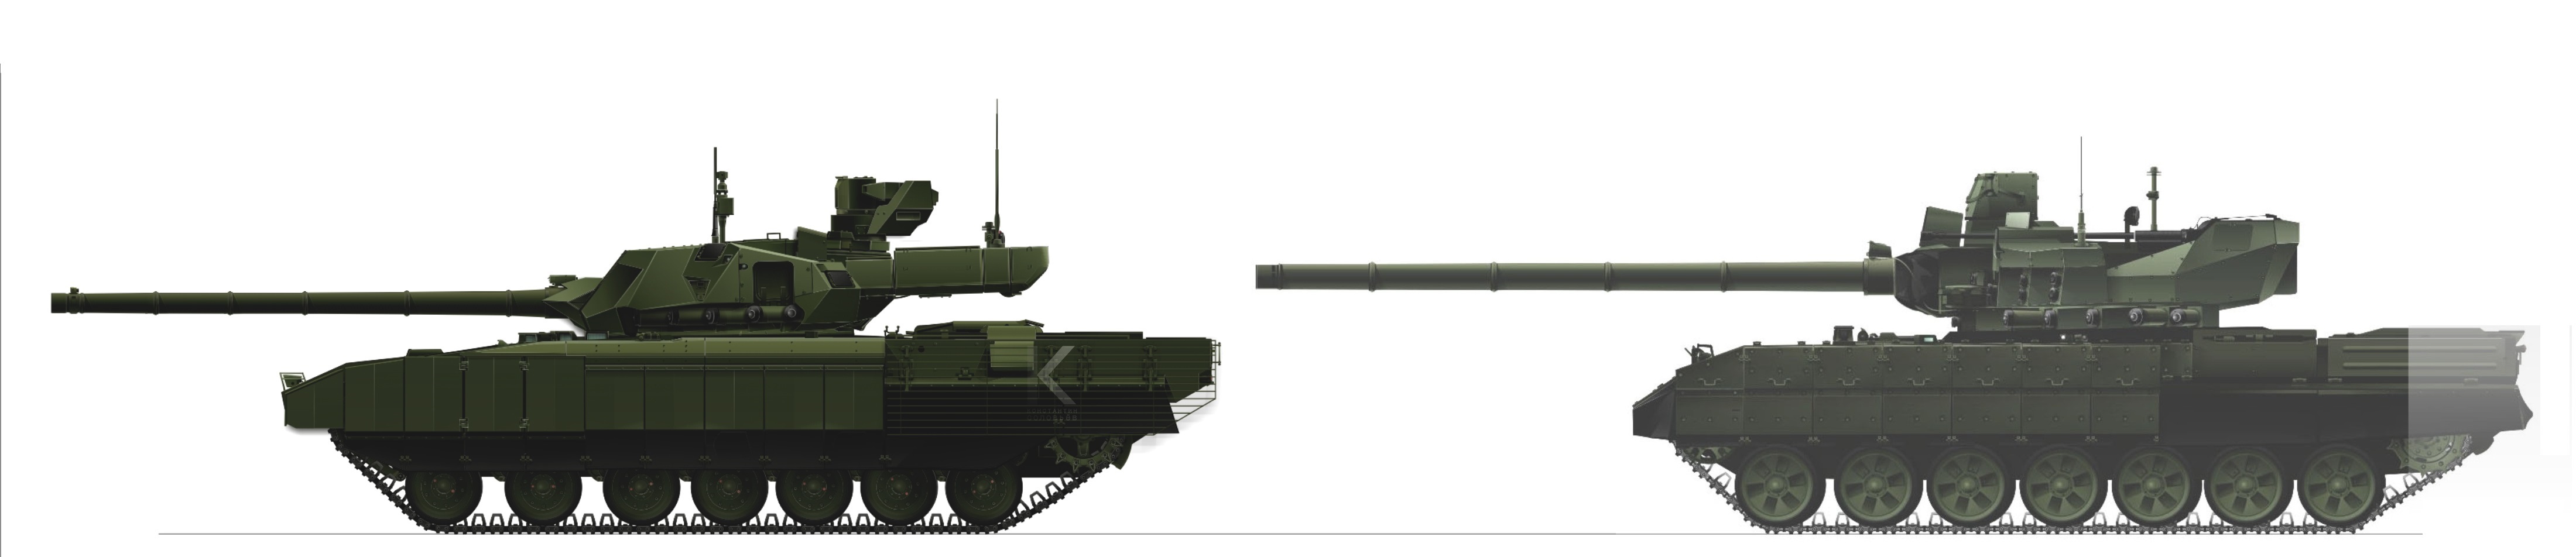 [Official] Armata Discussion thread #4 S7uJx